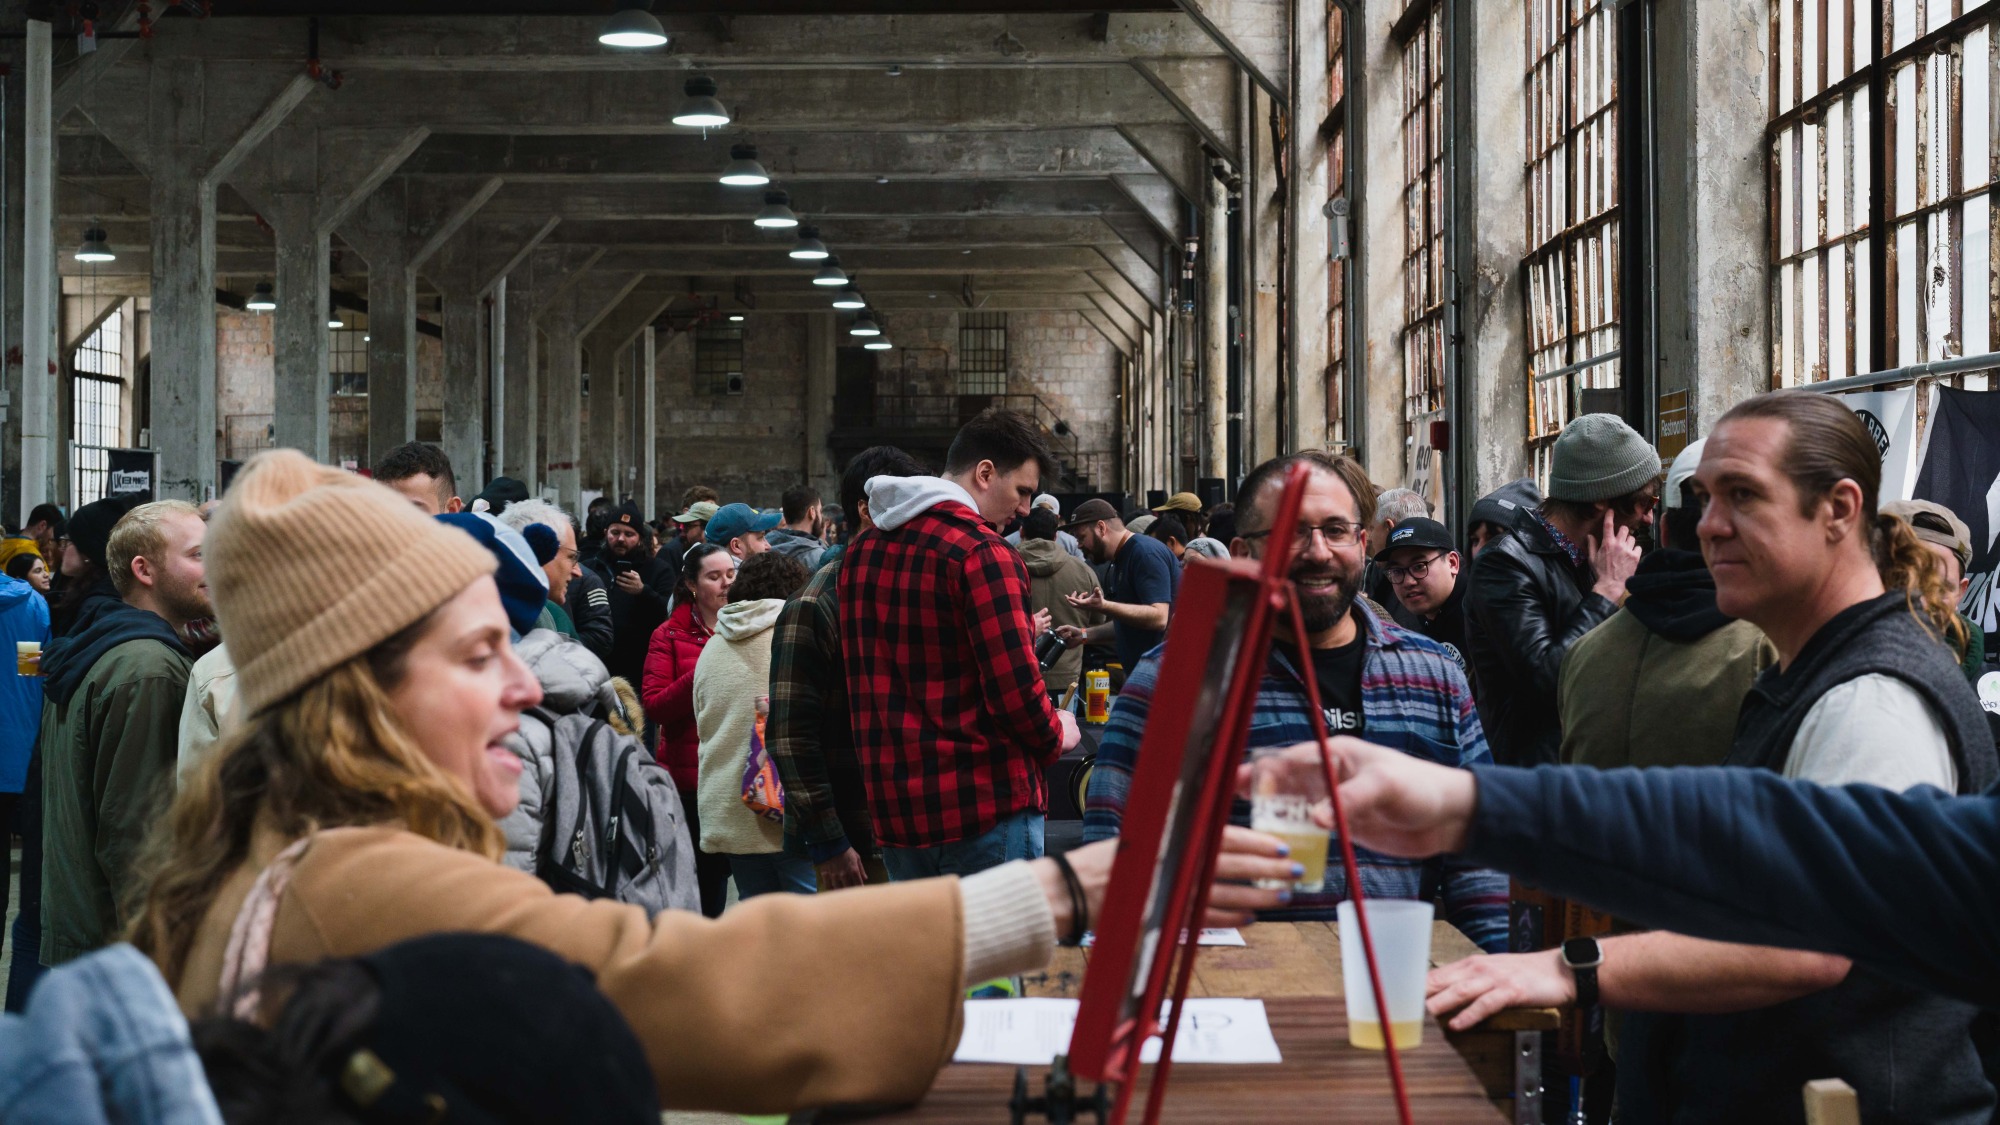 A crowd of people in a large industrial space. People hold beers.